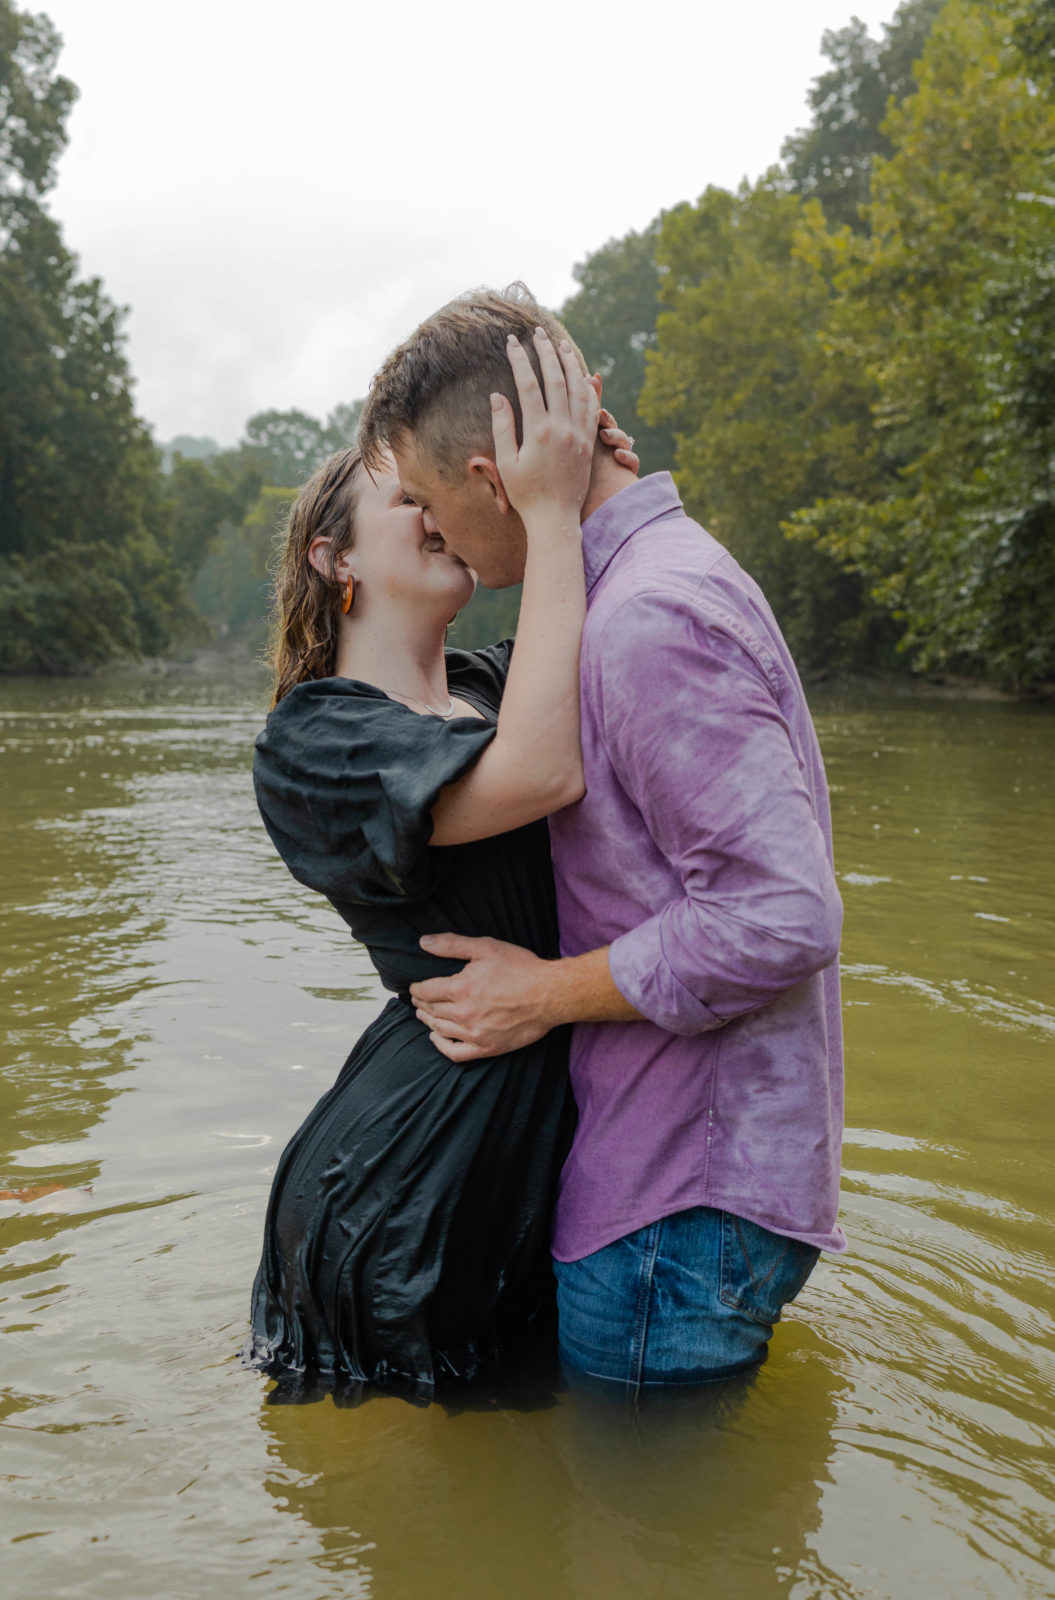 Couple kissing in the river during the summer.